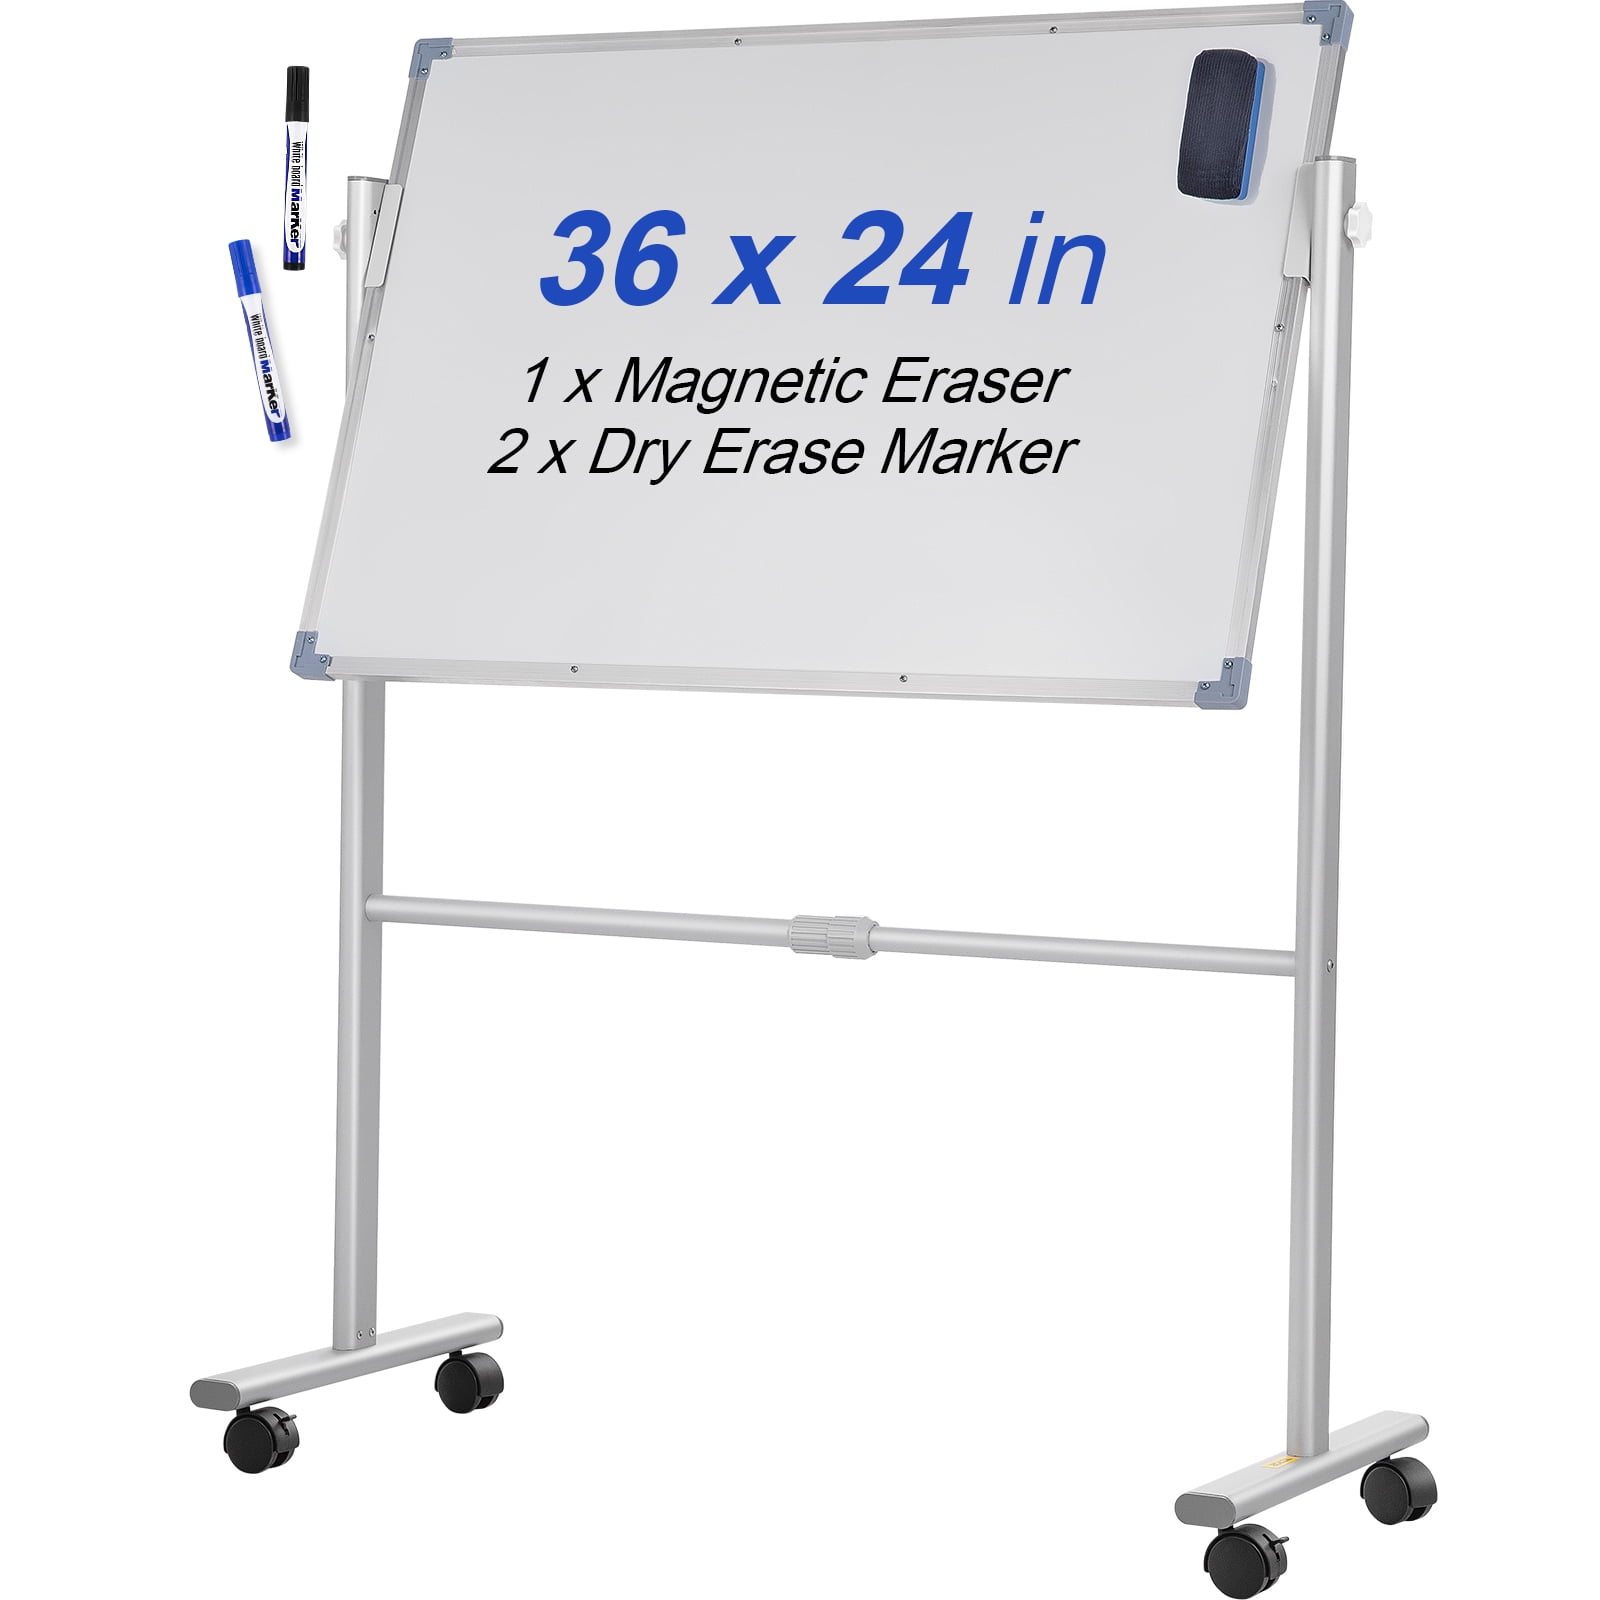 4 Magnets and 2 Erasers Ohuhu 12X16 Magnetic Desktop Foldable Whiteboard Double-Sided Portable Mini Easel for Kids Drawing Teaching Memo Office With 6 Dry Erase Markers Small Dry Erase White Board 